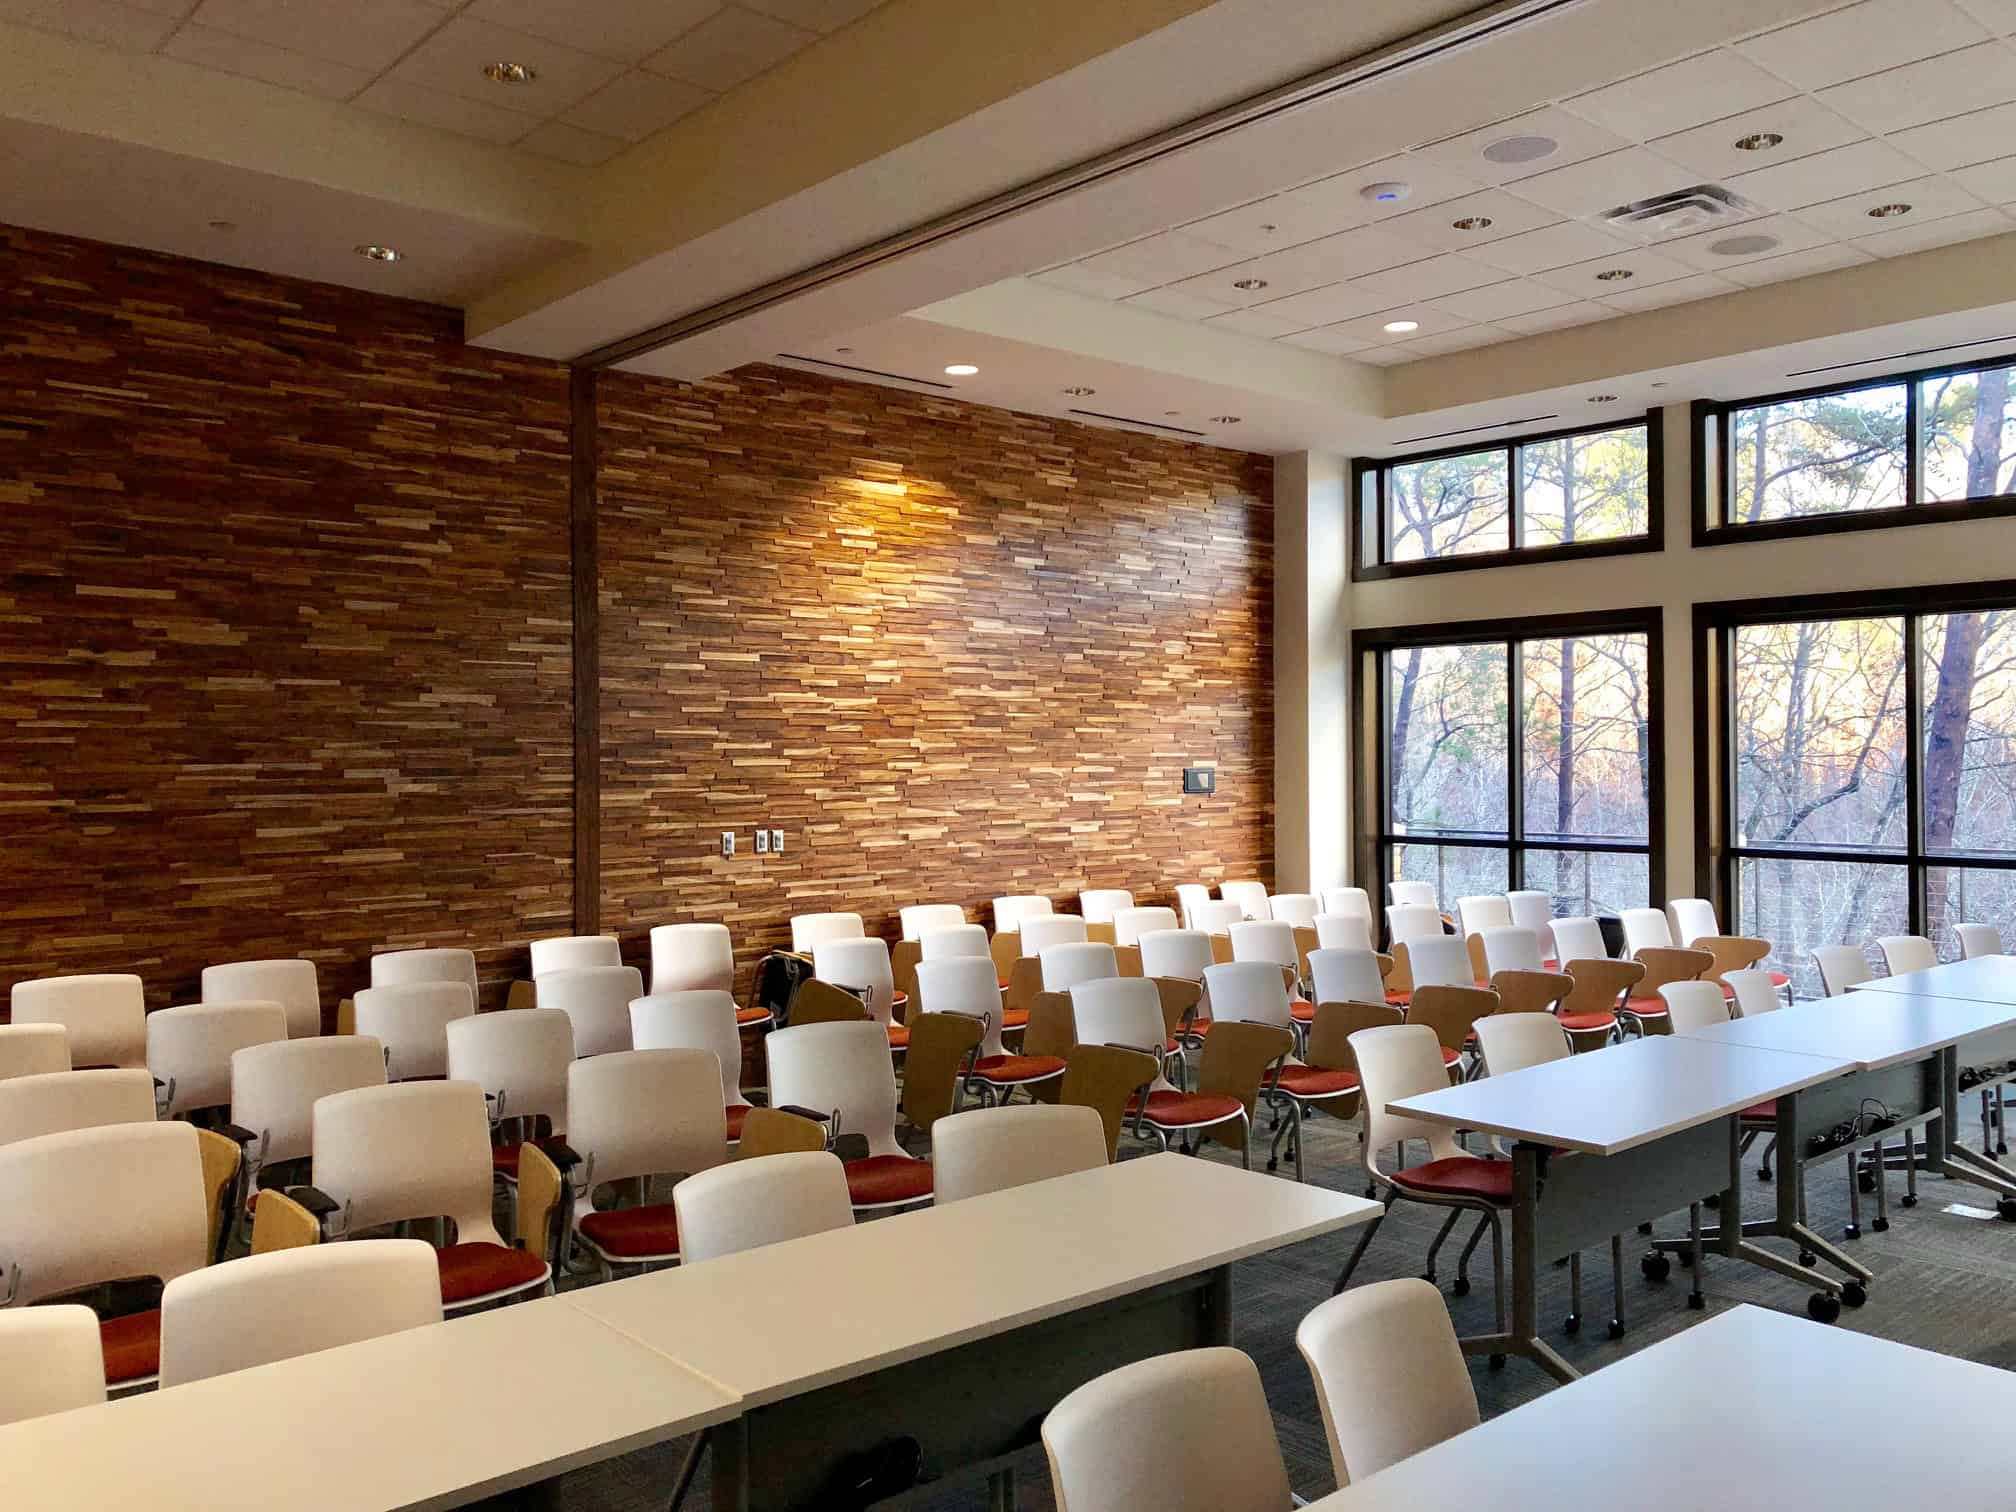 Conference room at SmoothRock Center